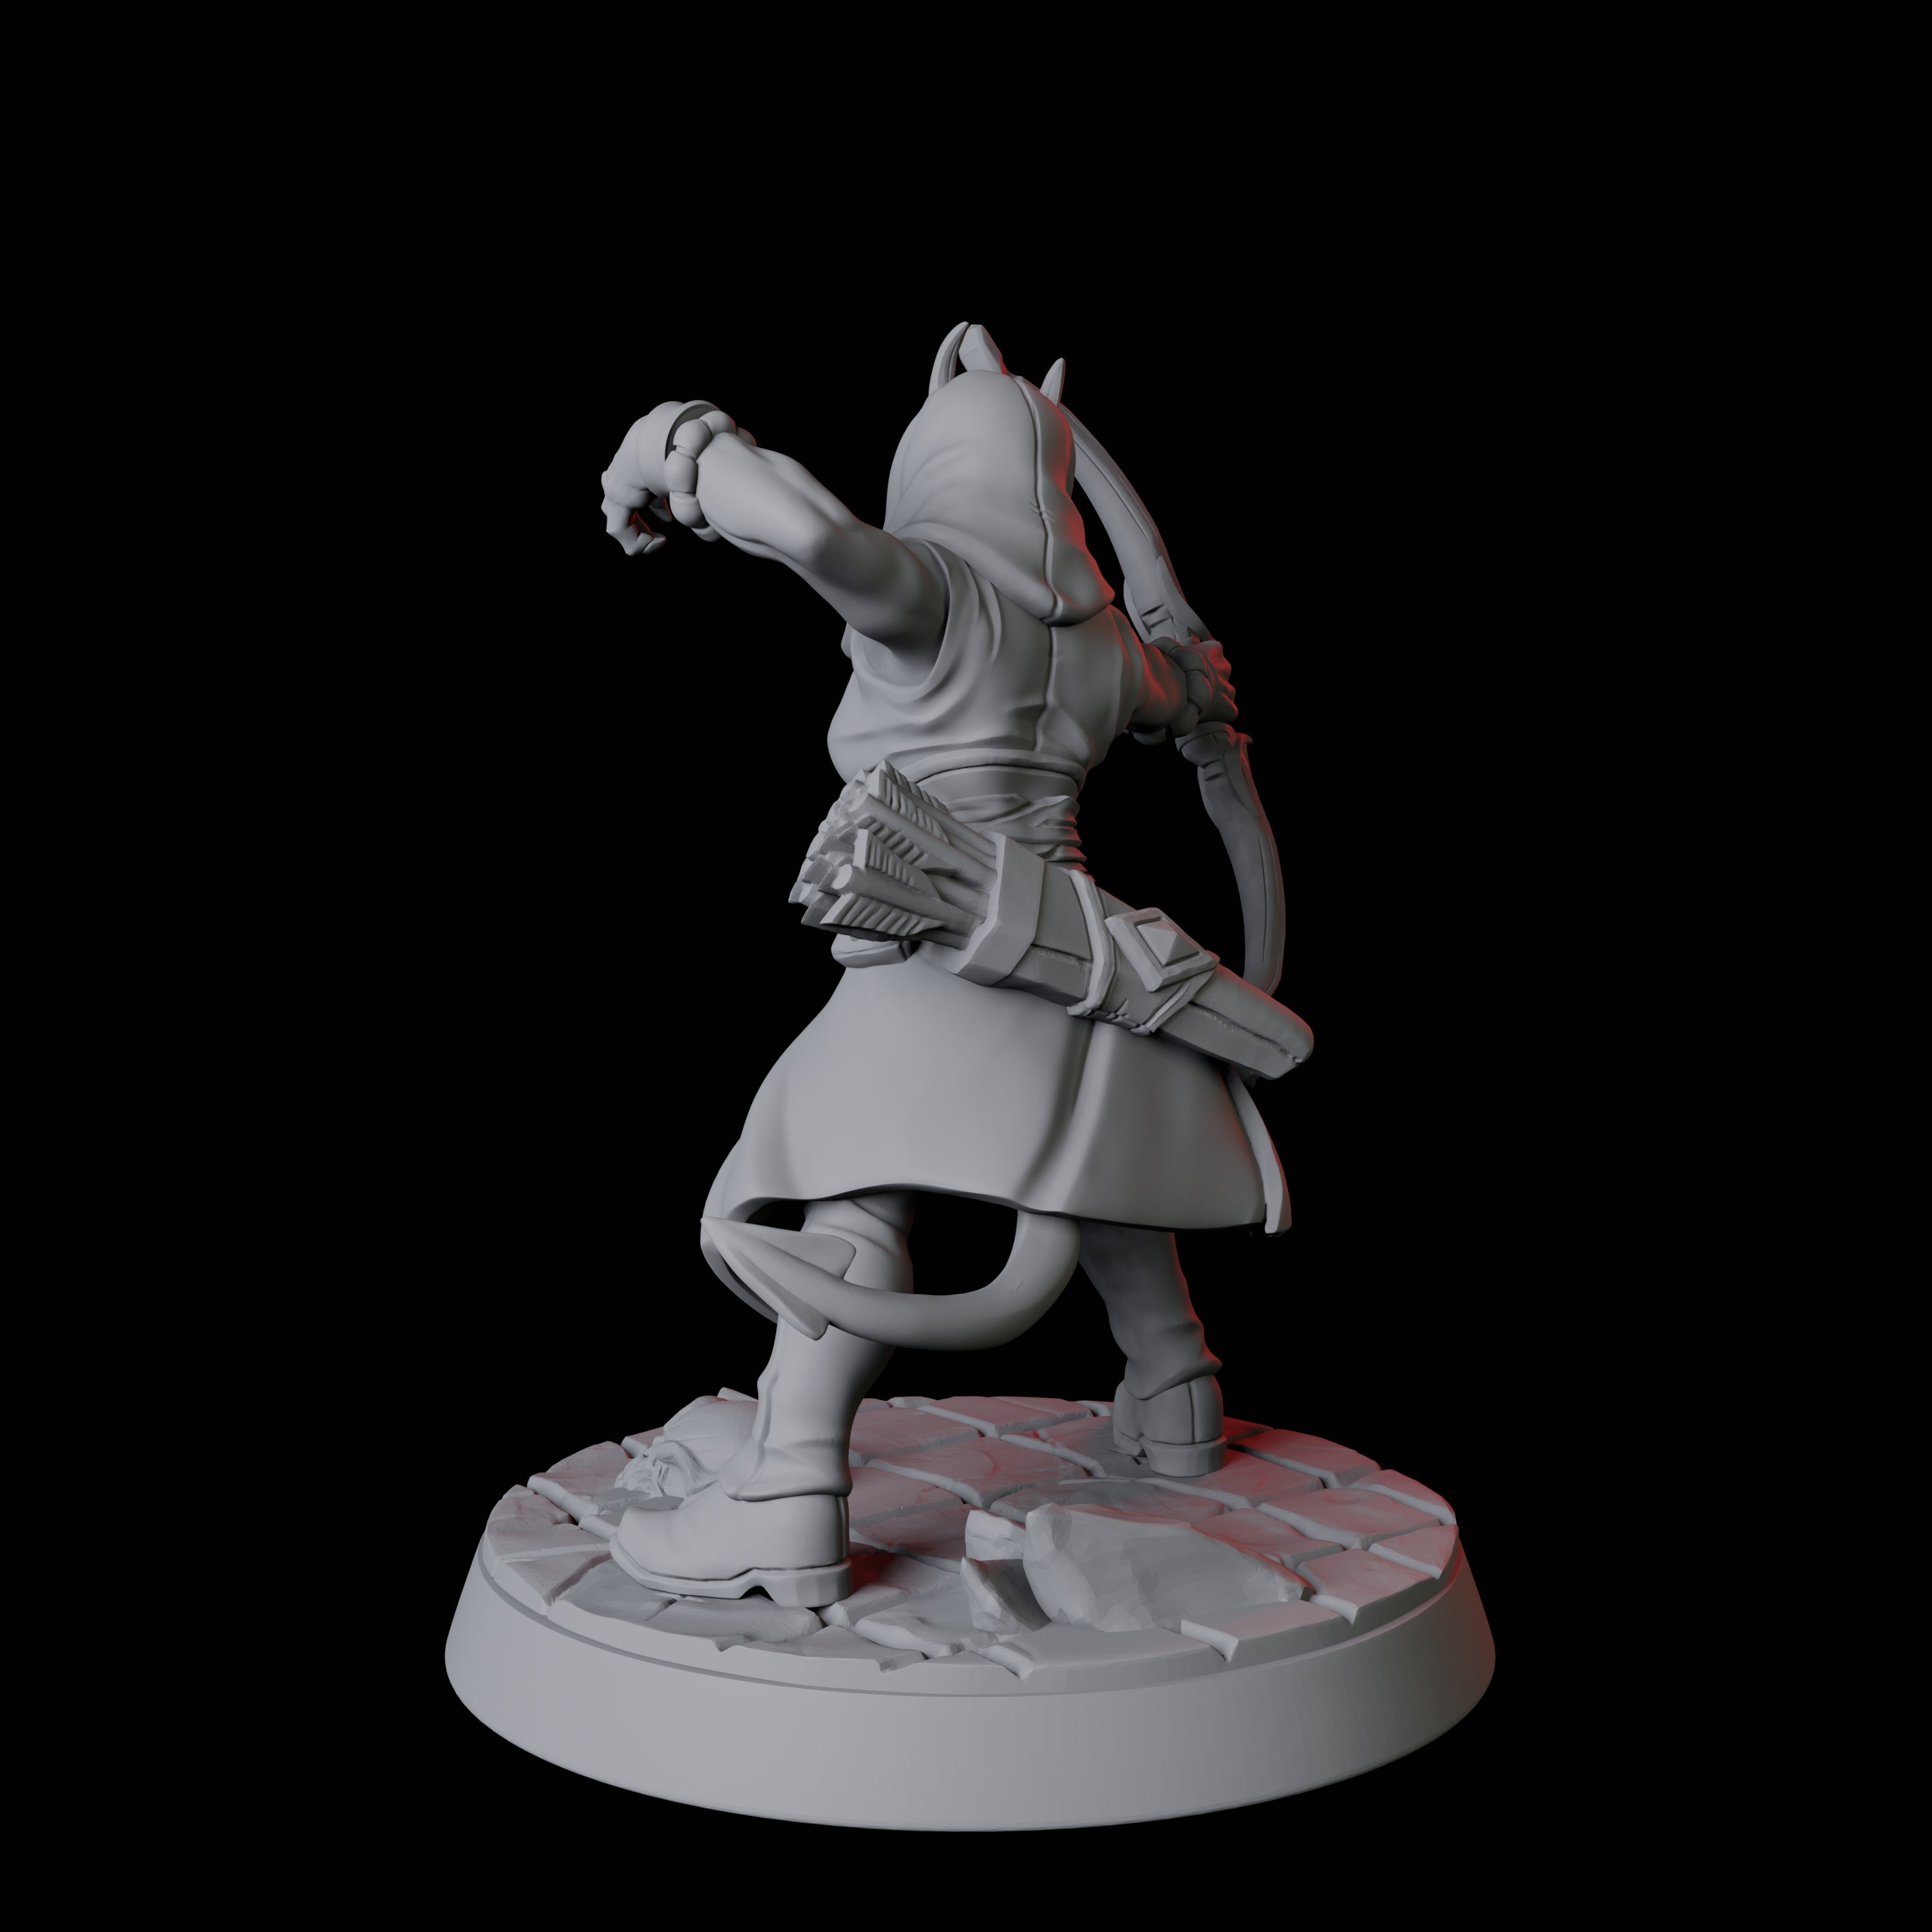 Tiefling Fighter F Miniature for Dungeons and Dragons, Pathfinder or other TTRPGs